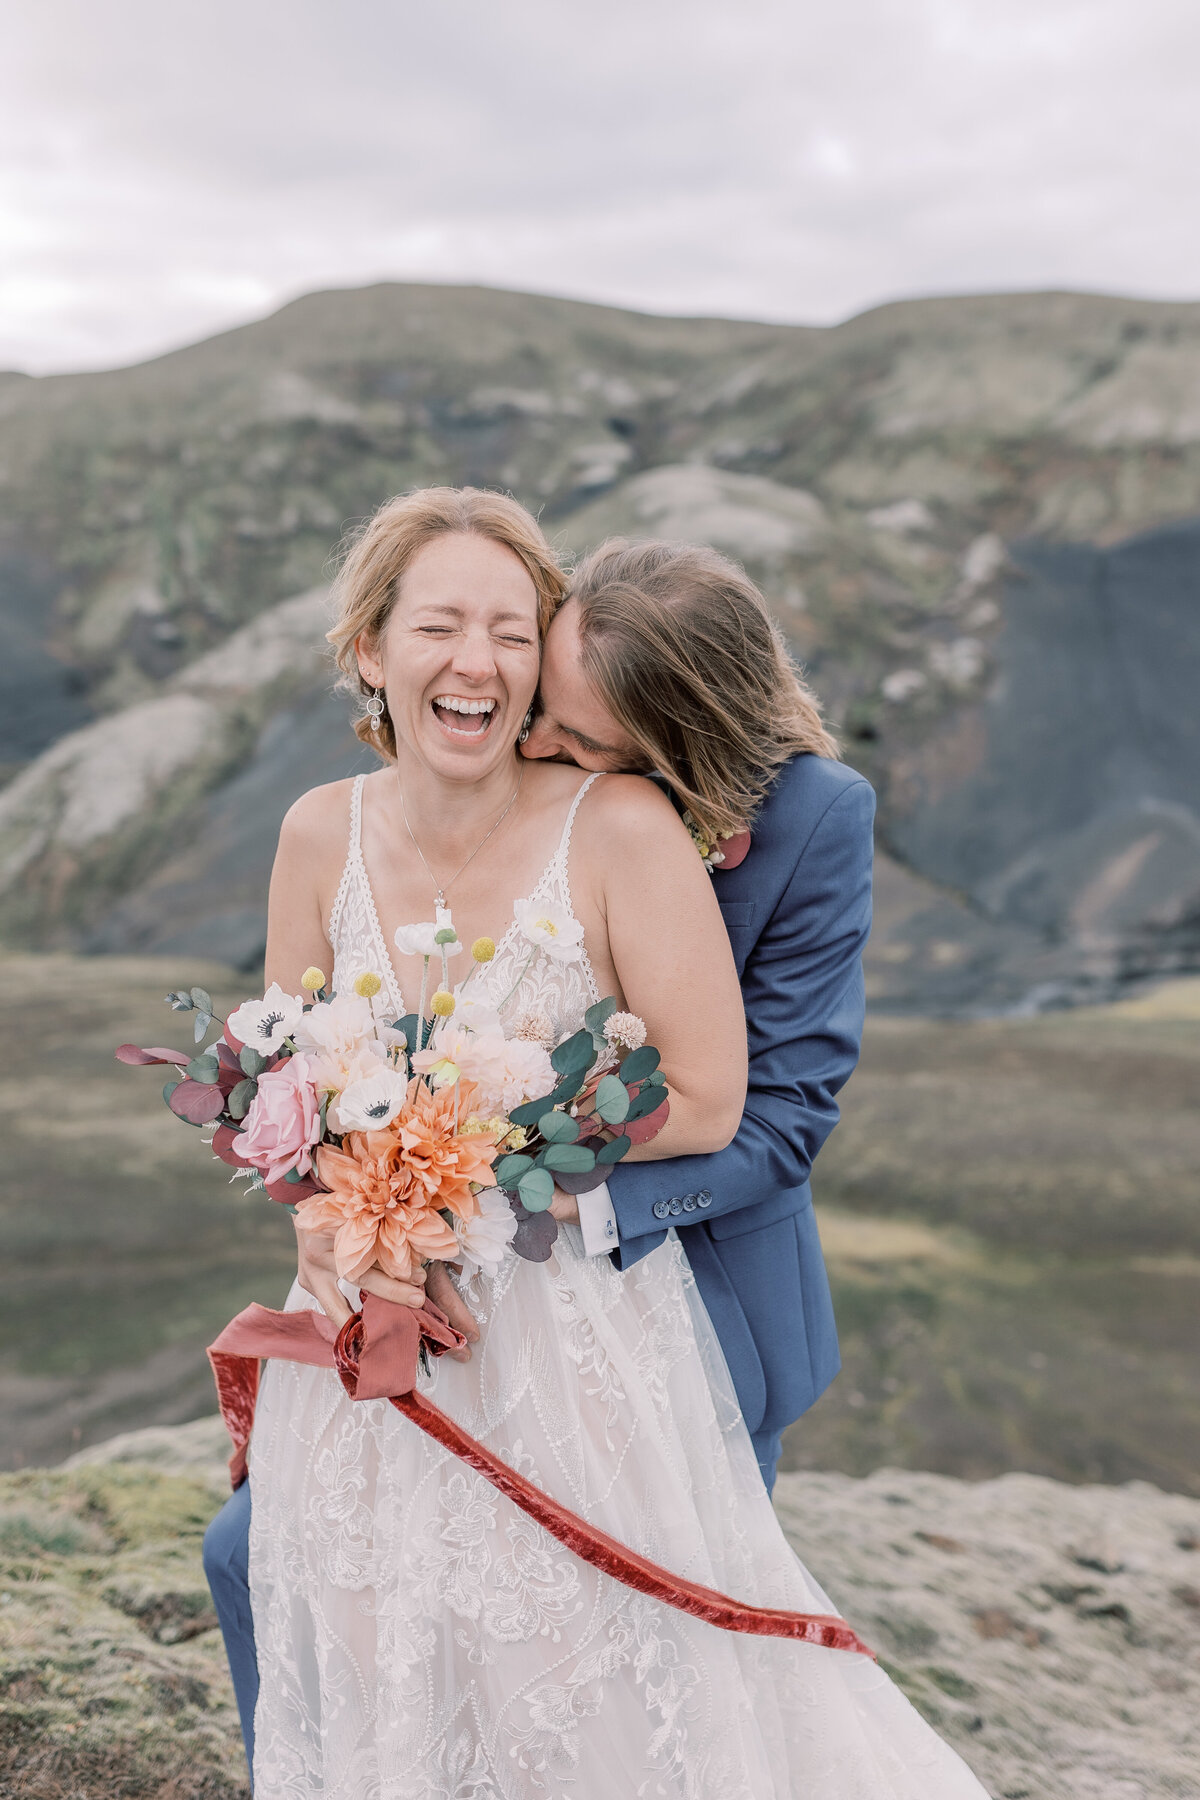 Bride holding her bouquet of dried flowers while the groom kisses her neck with the Esja mountain range in the background.